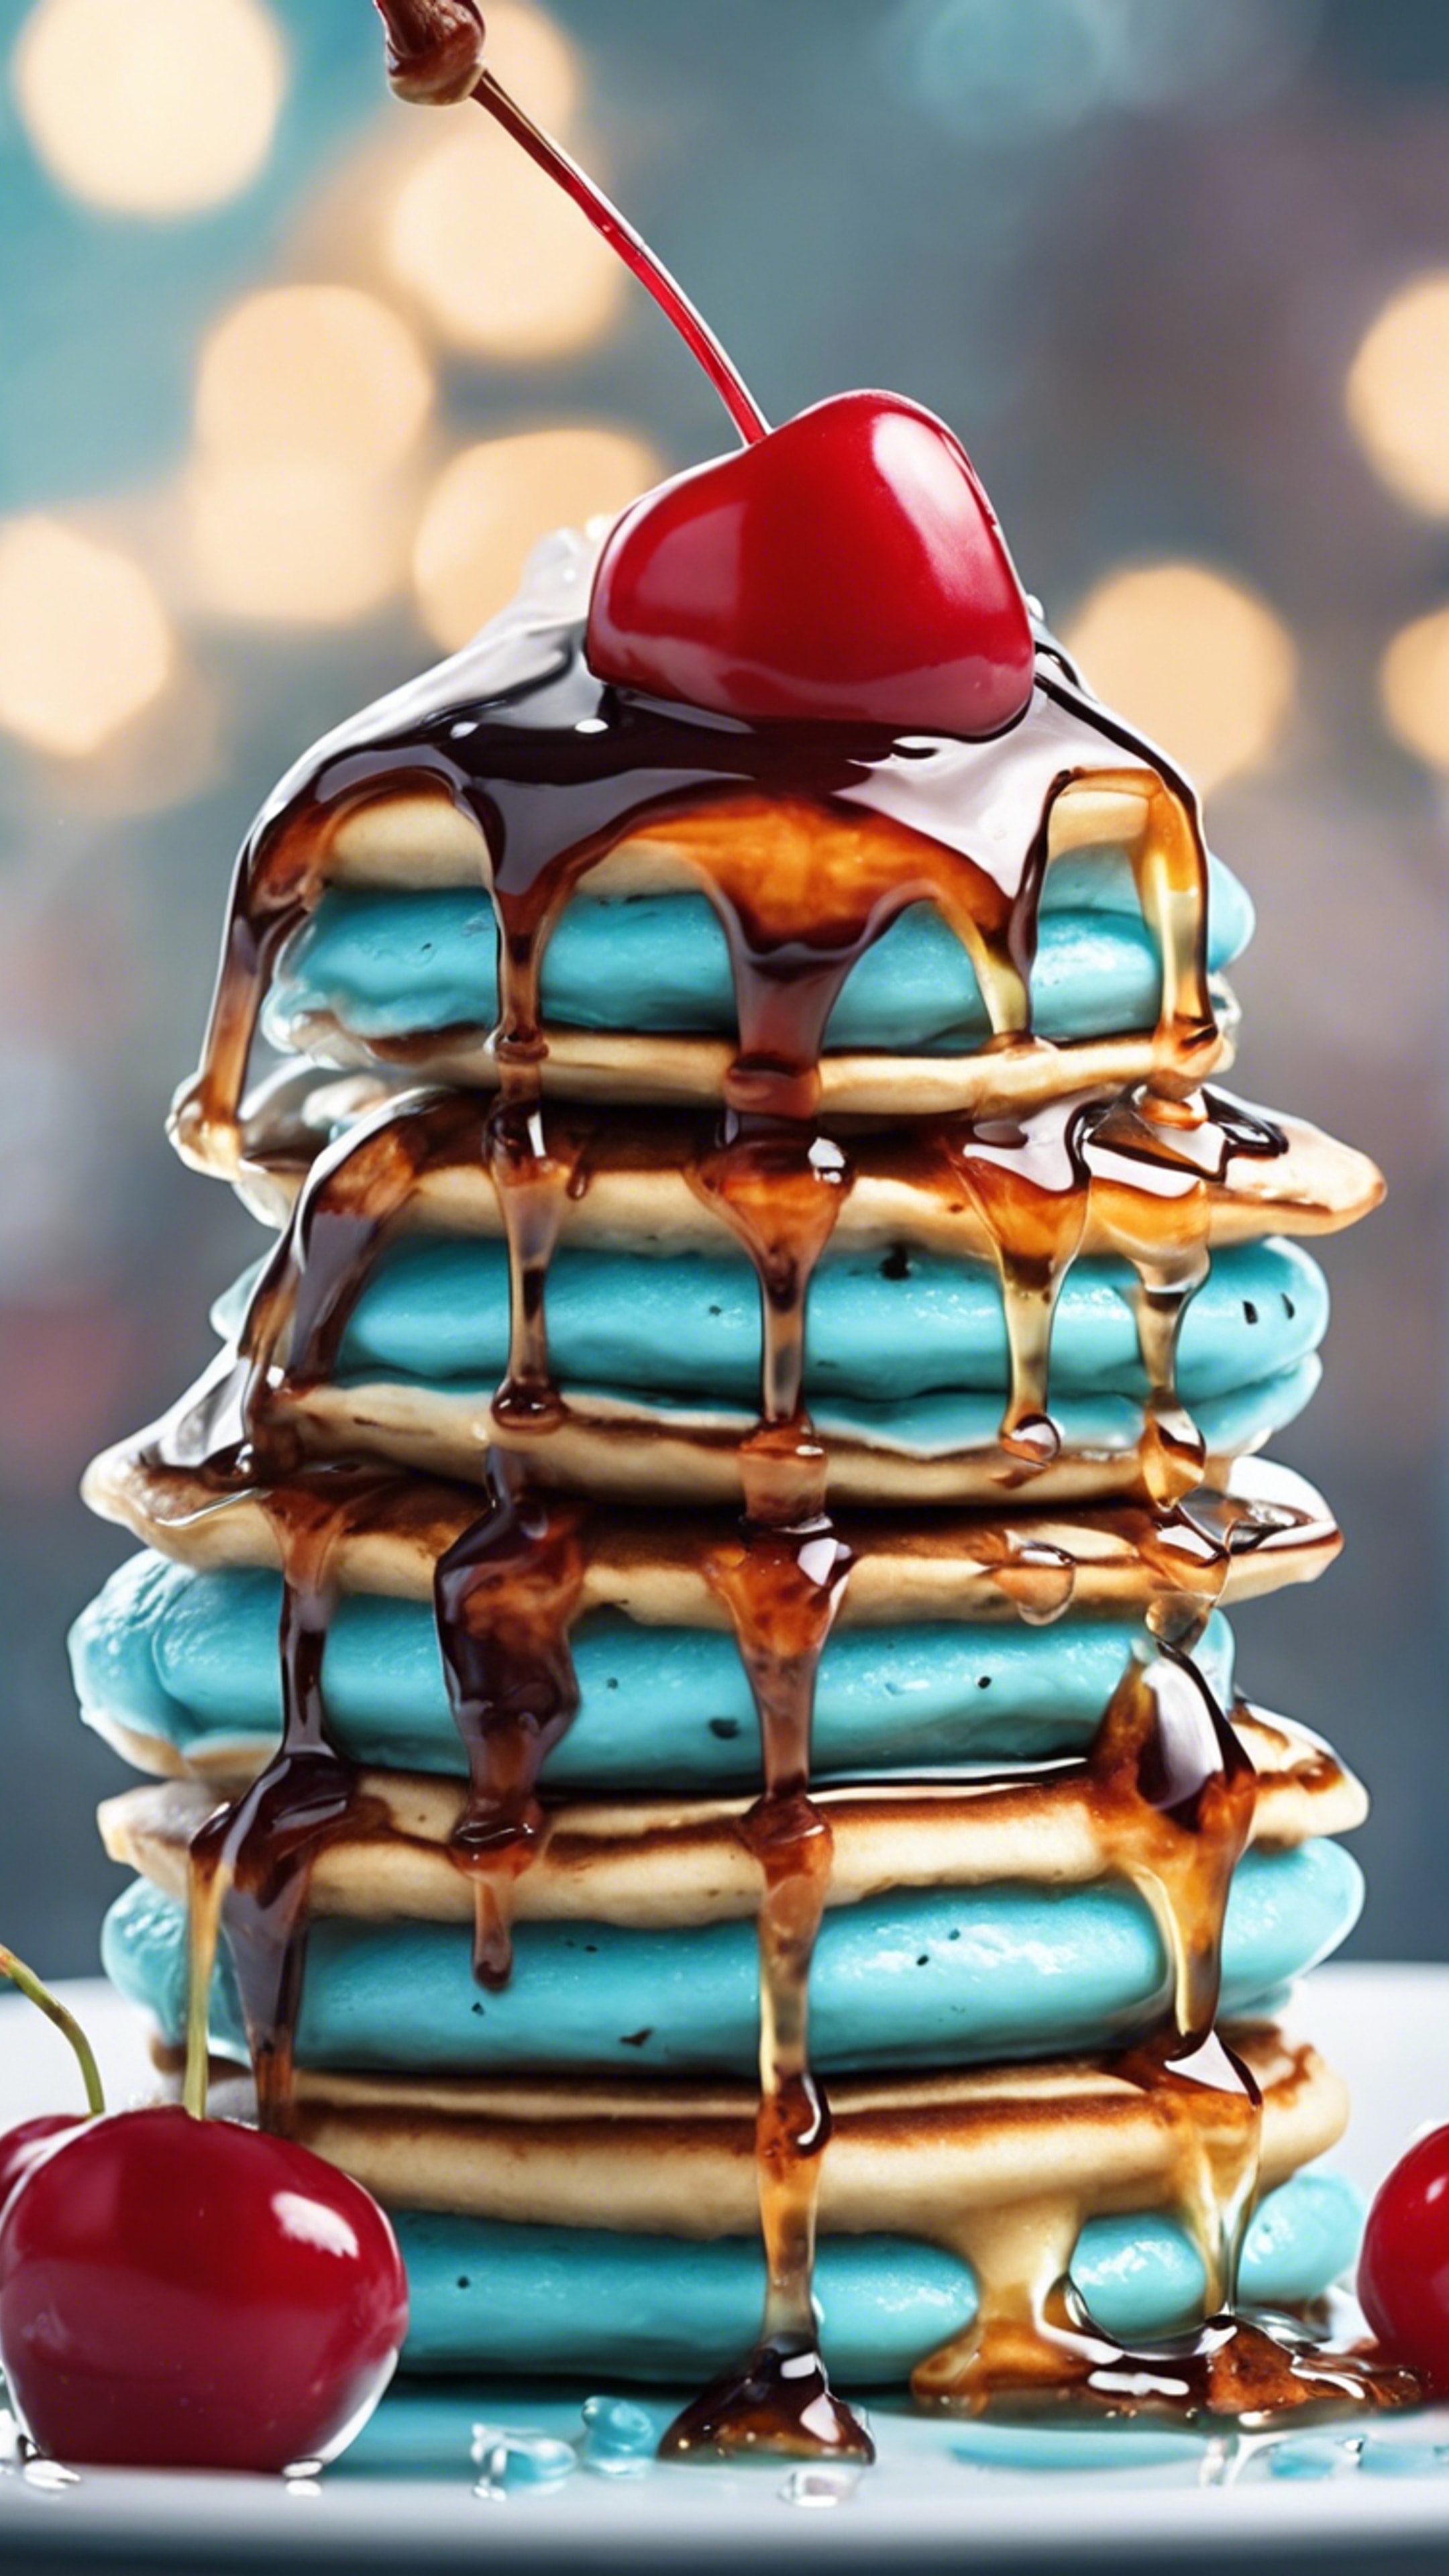 A stack of kawaii light blue pancakes dripping with syrup and a cherry on top. Обои[05c3a9af3a95463c8379]